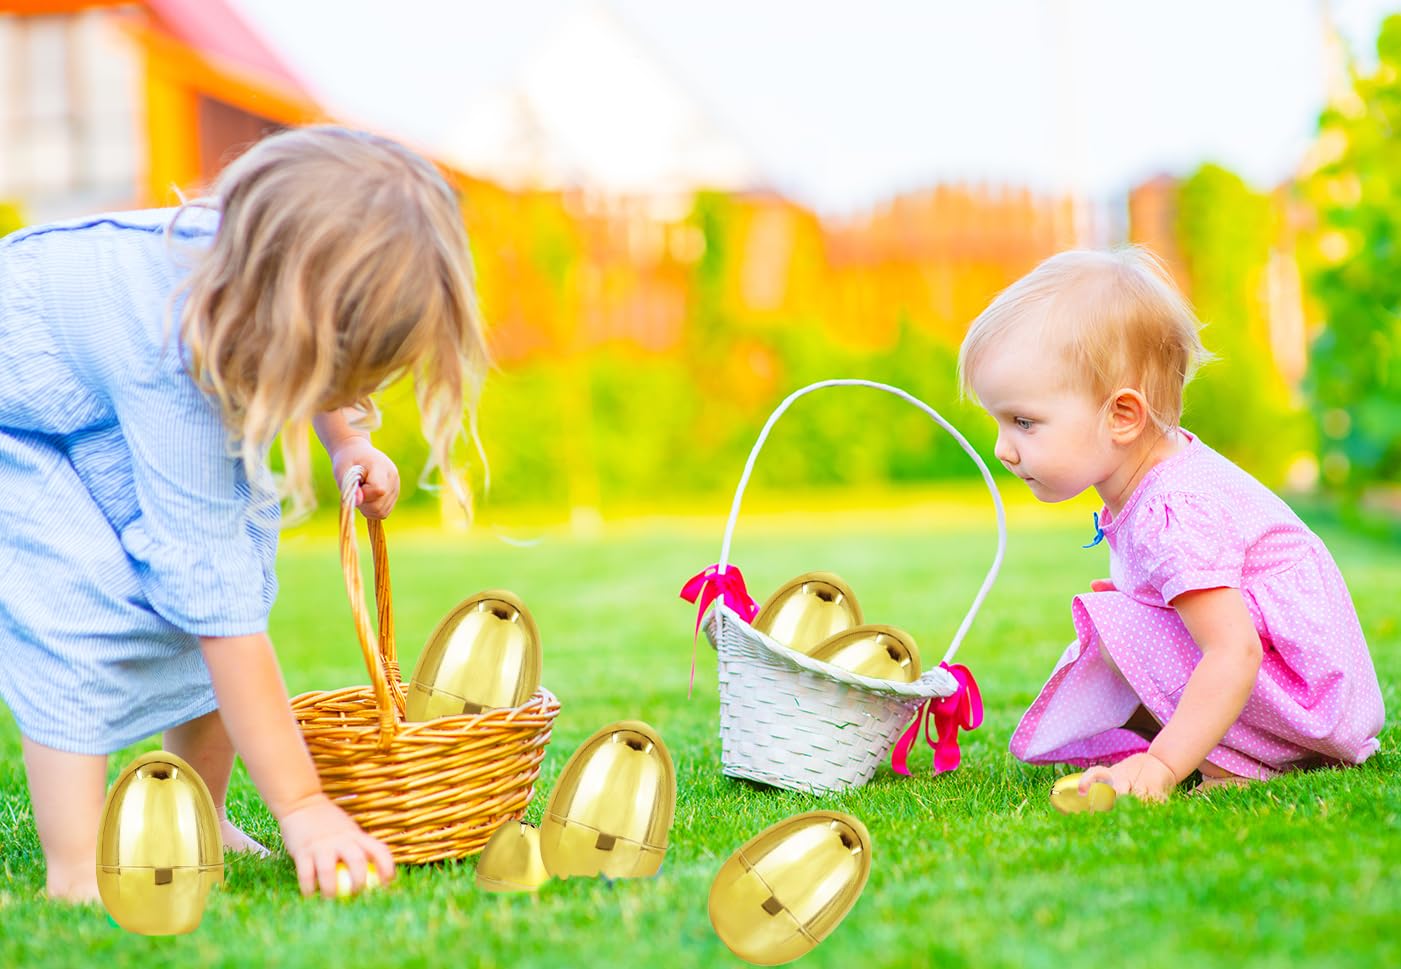 Chochkees Jumbo Golden Easter Eggs Metallic Gold, Goodie Basket Prize, 6" Inch (6-Pack)